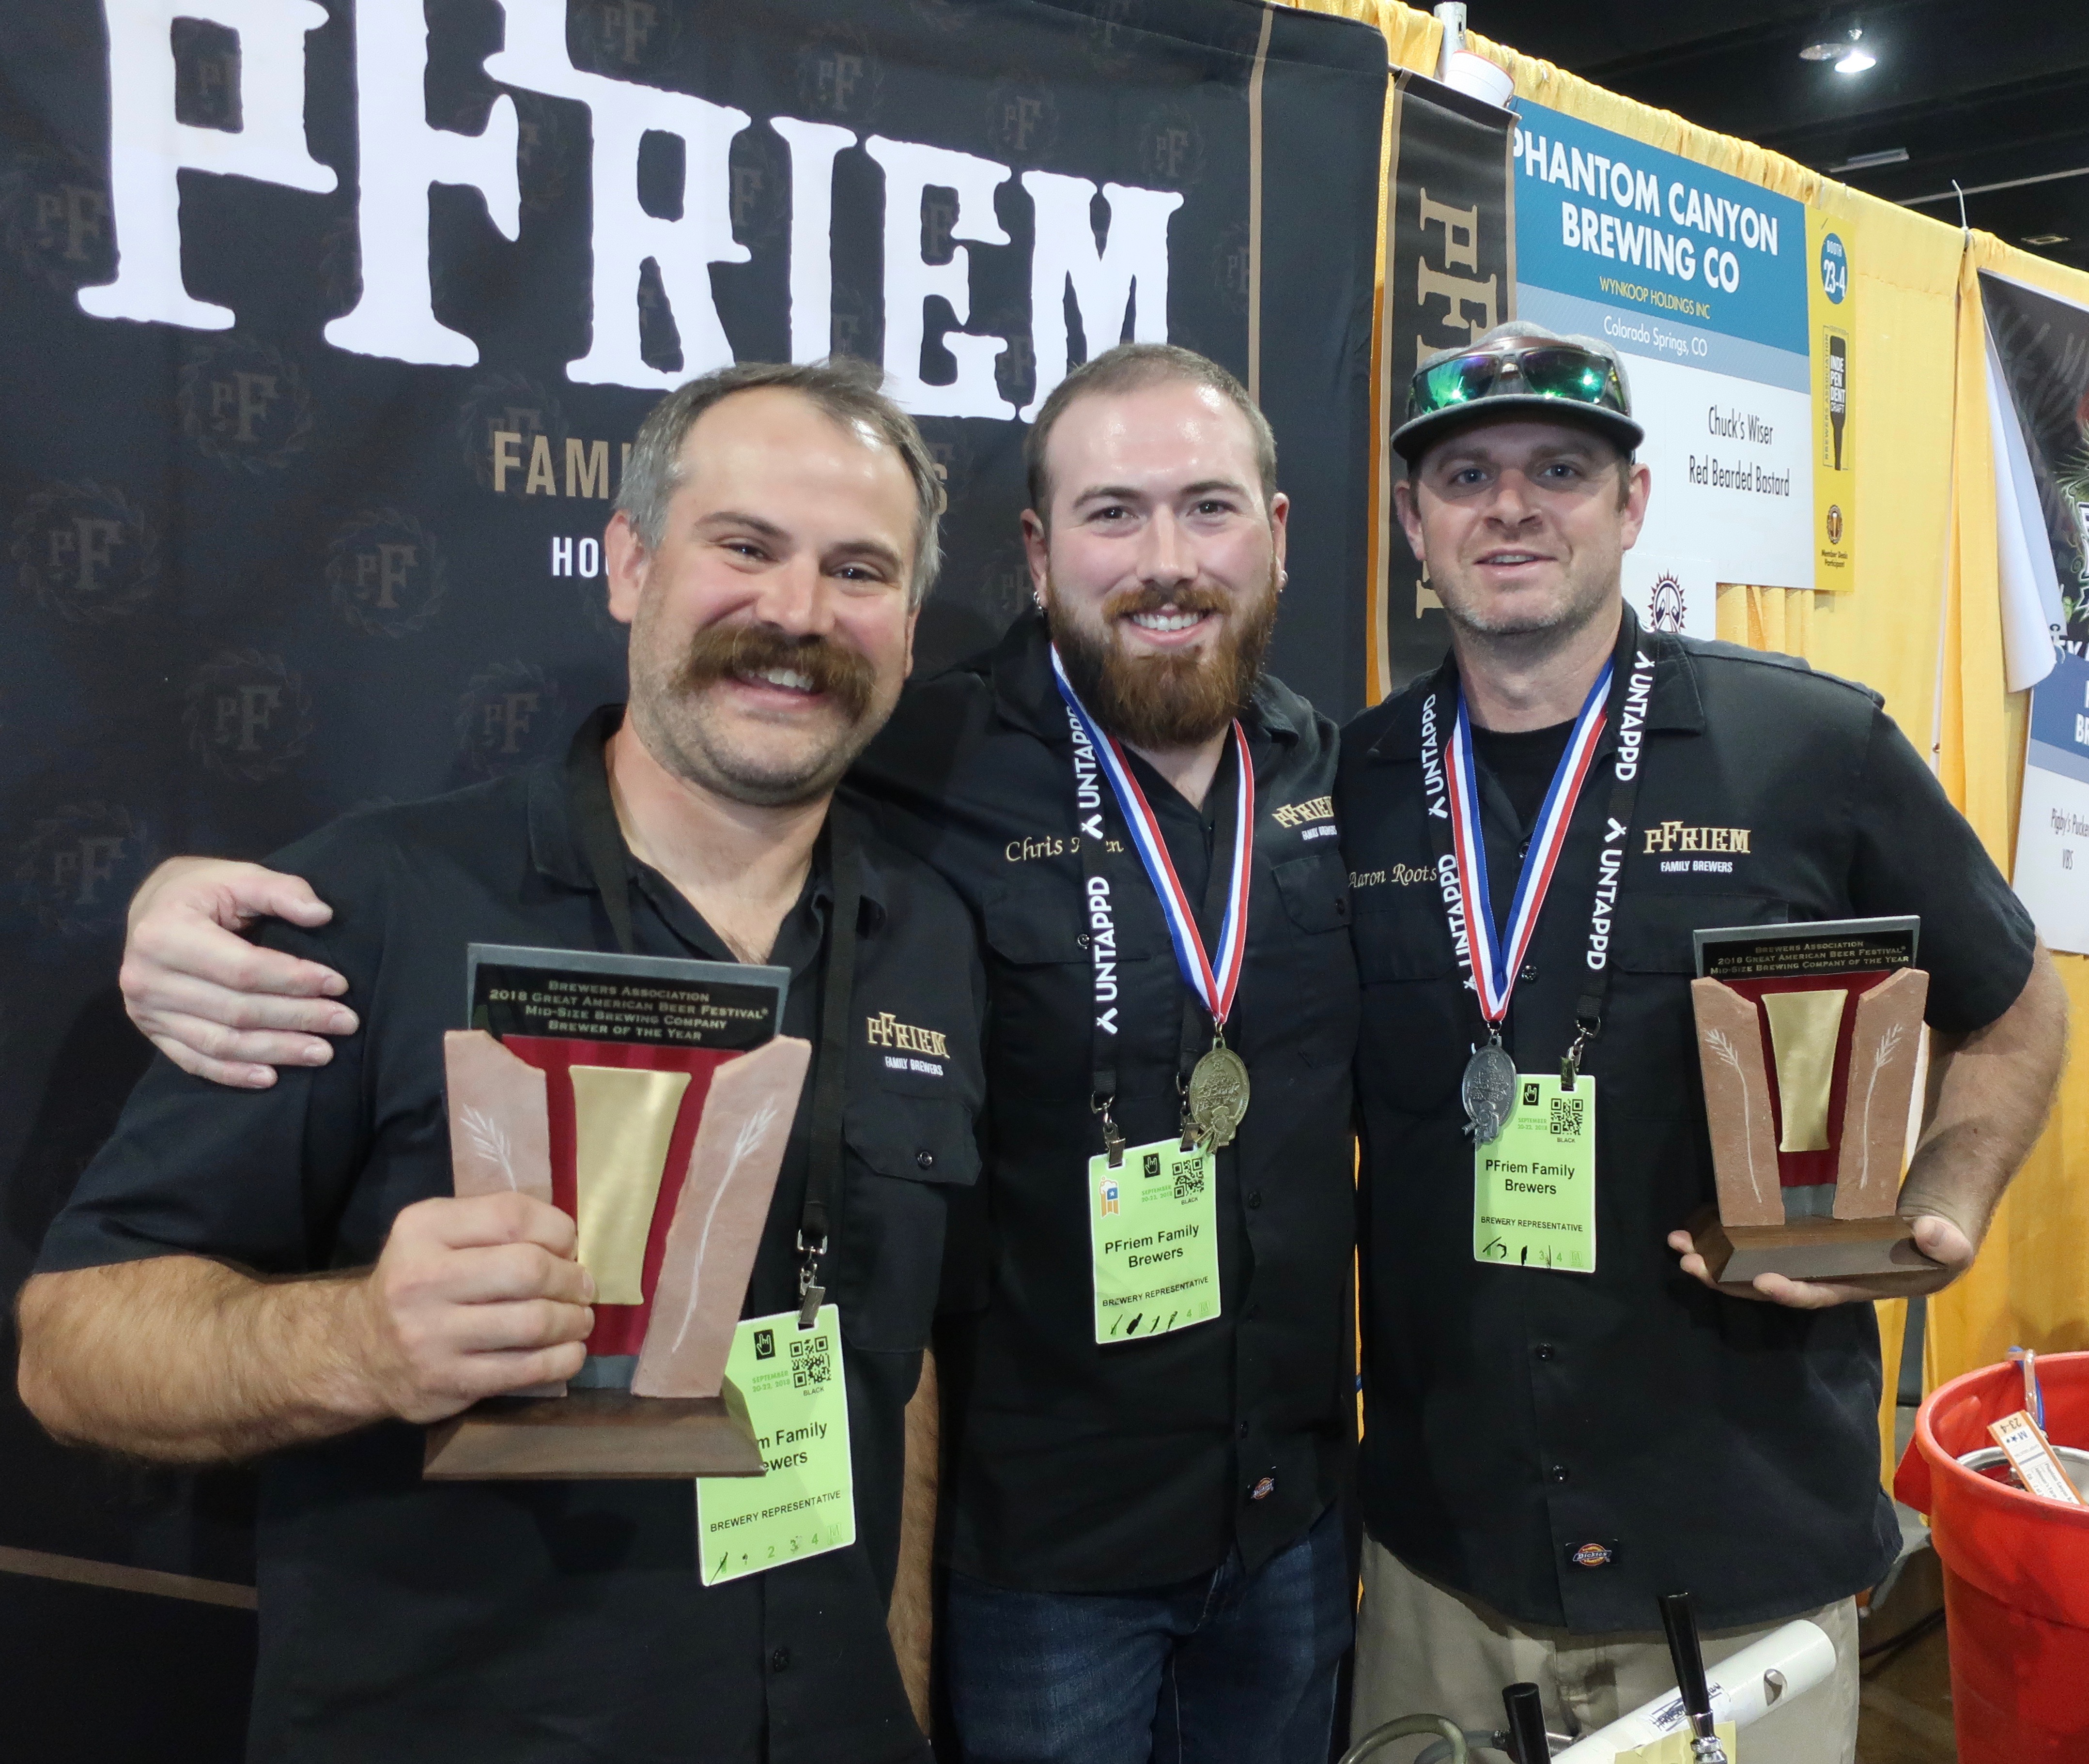 pFriem Family Brewers with their Mid Size Brewery of the Year Award and two GABF Medals at the 2018 Great American Beer Festival.